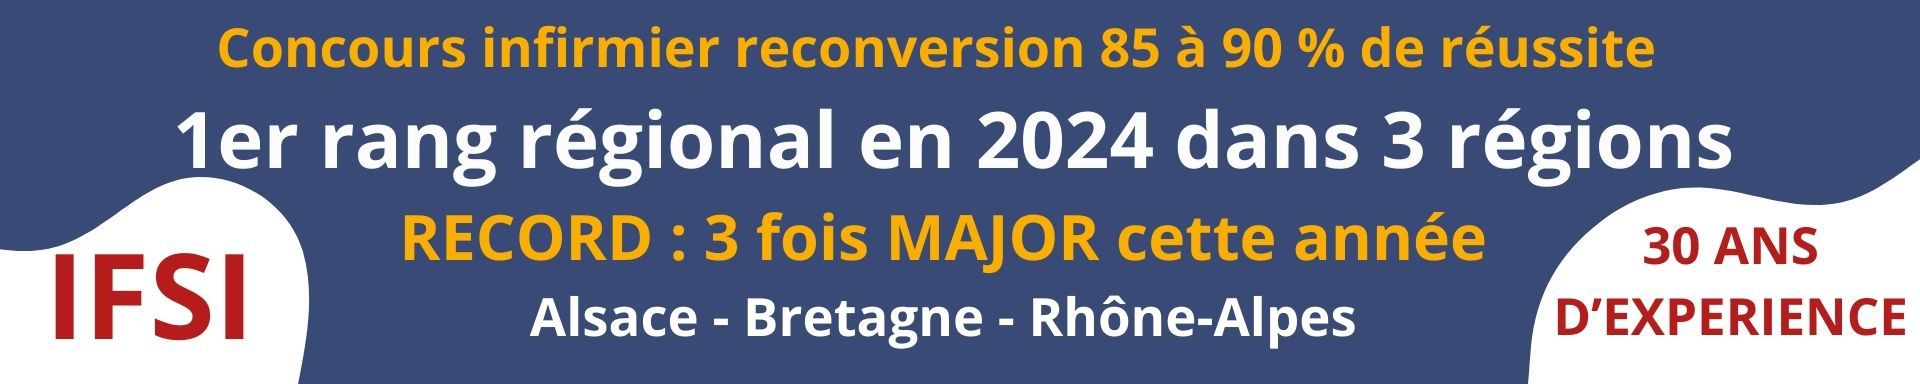 exemple sujet concours infirmier euthanasie